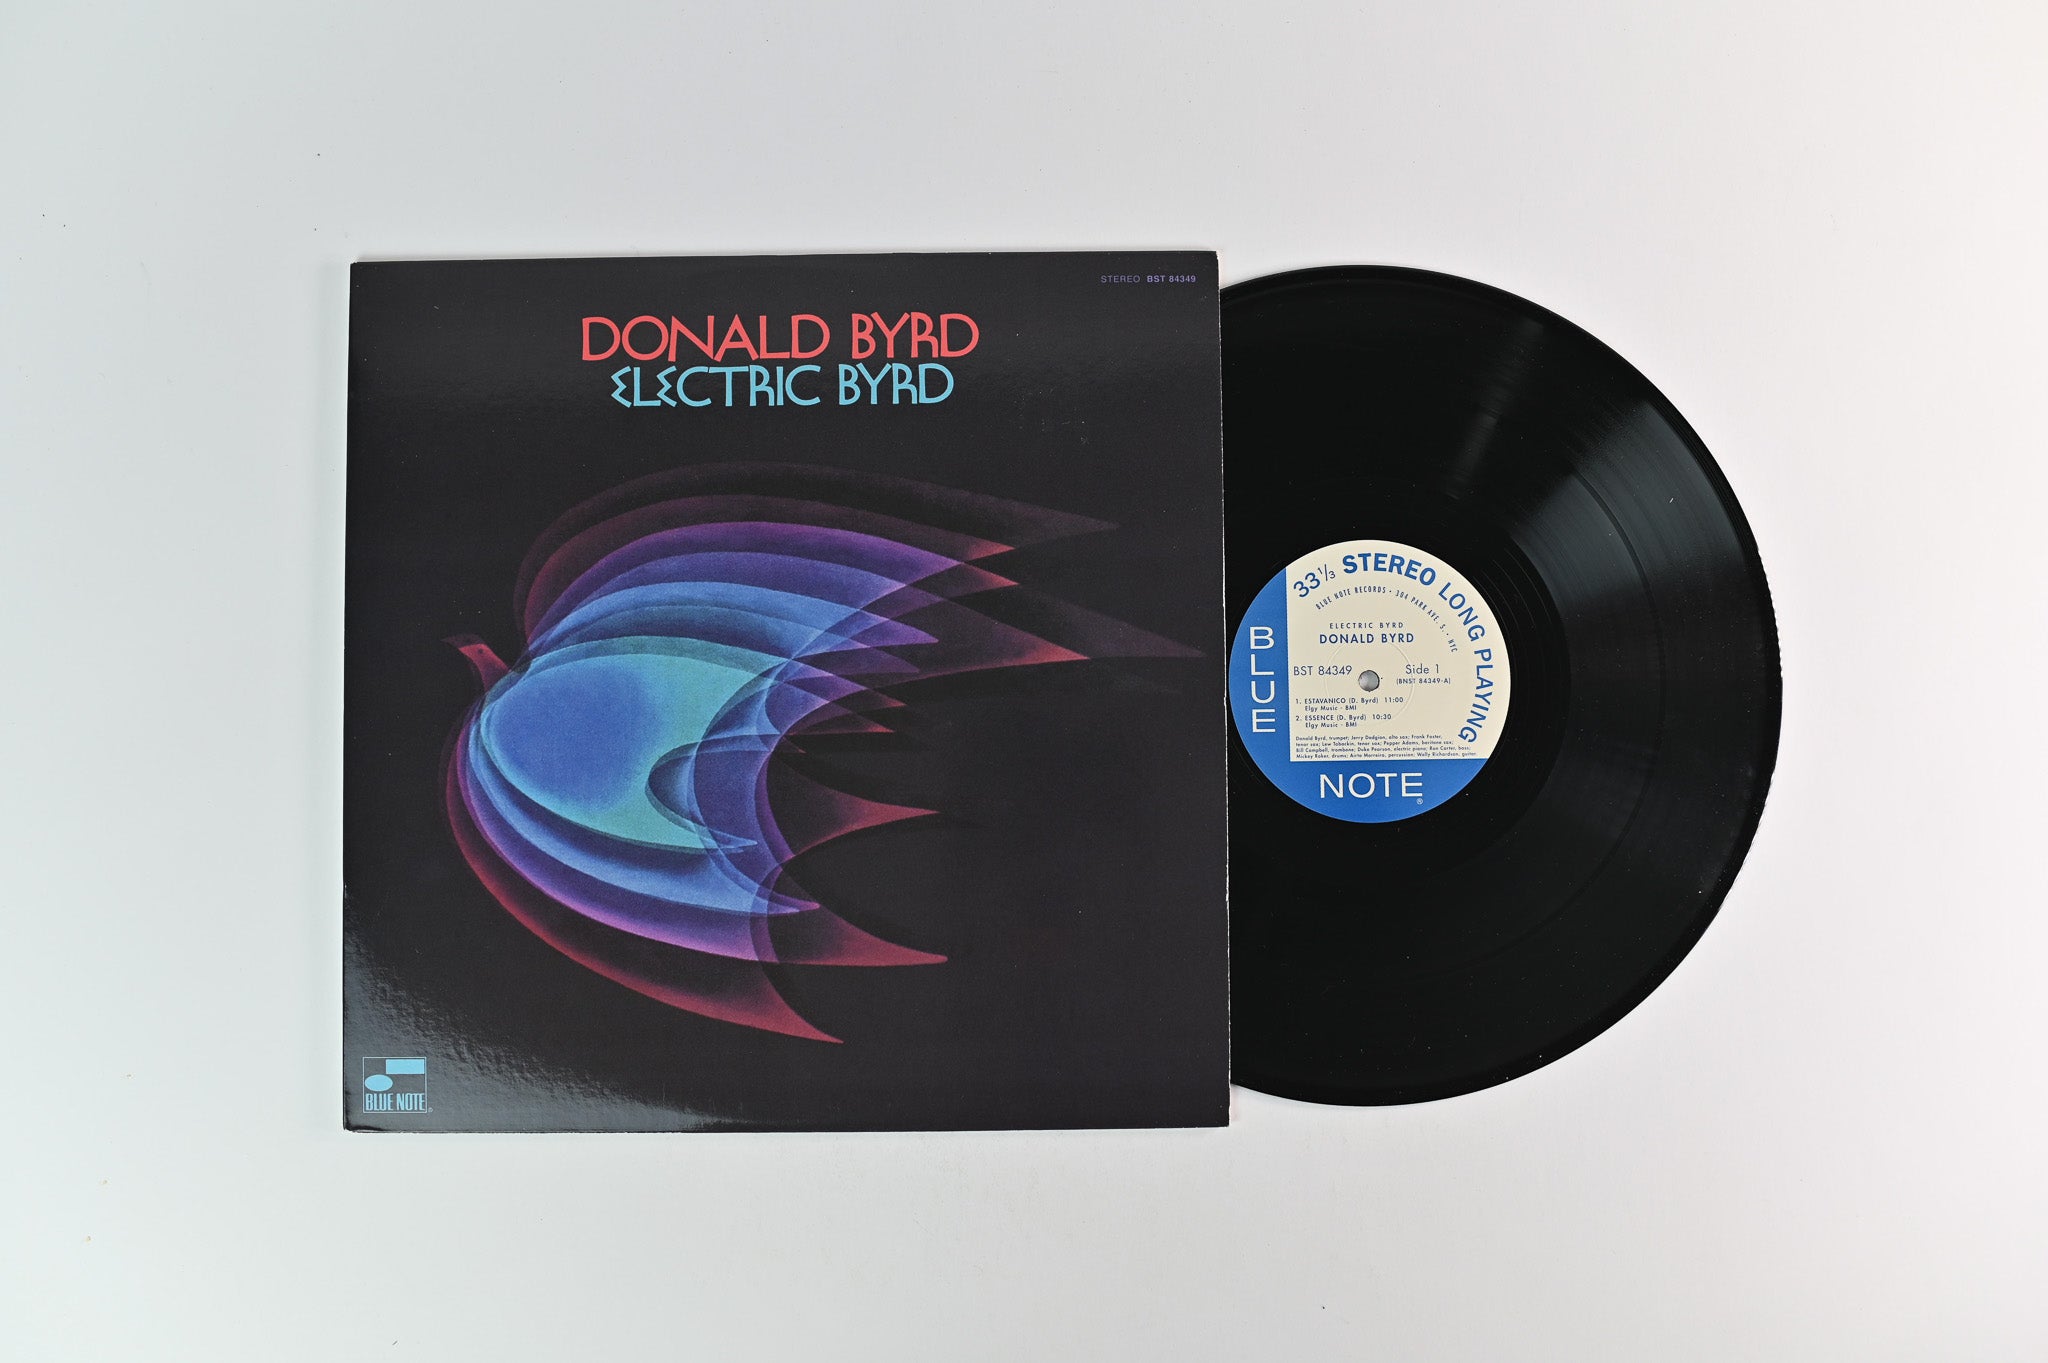 Donald Byrd - Electric Byrd on Blue Note Reissue